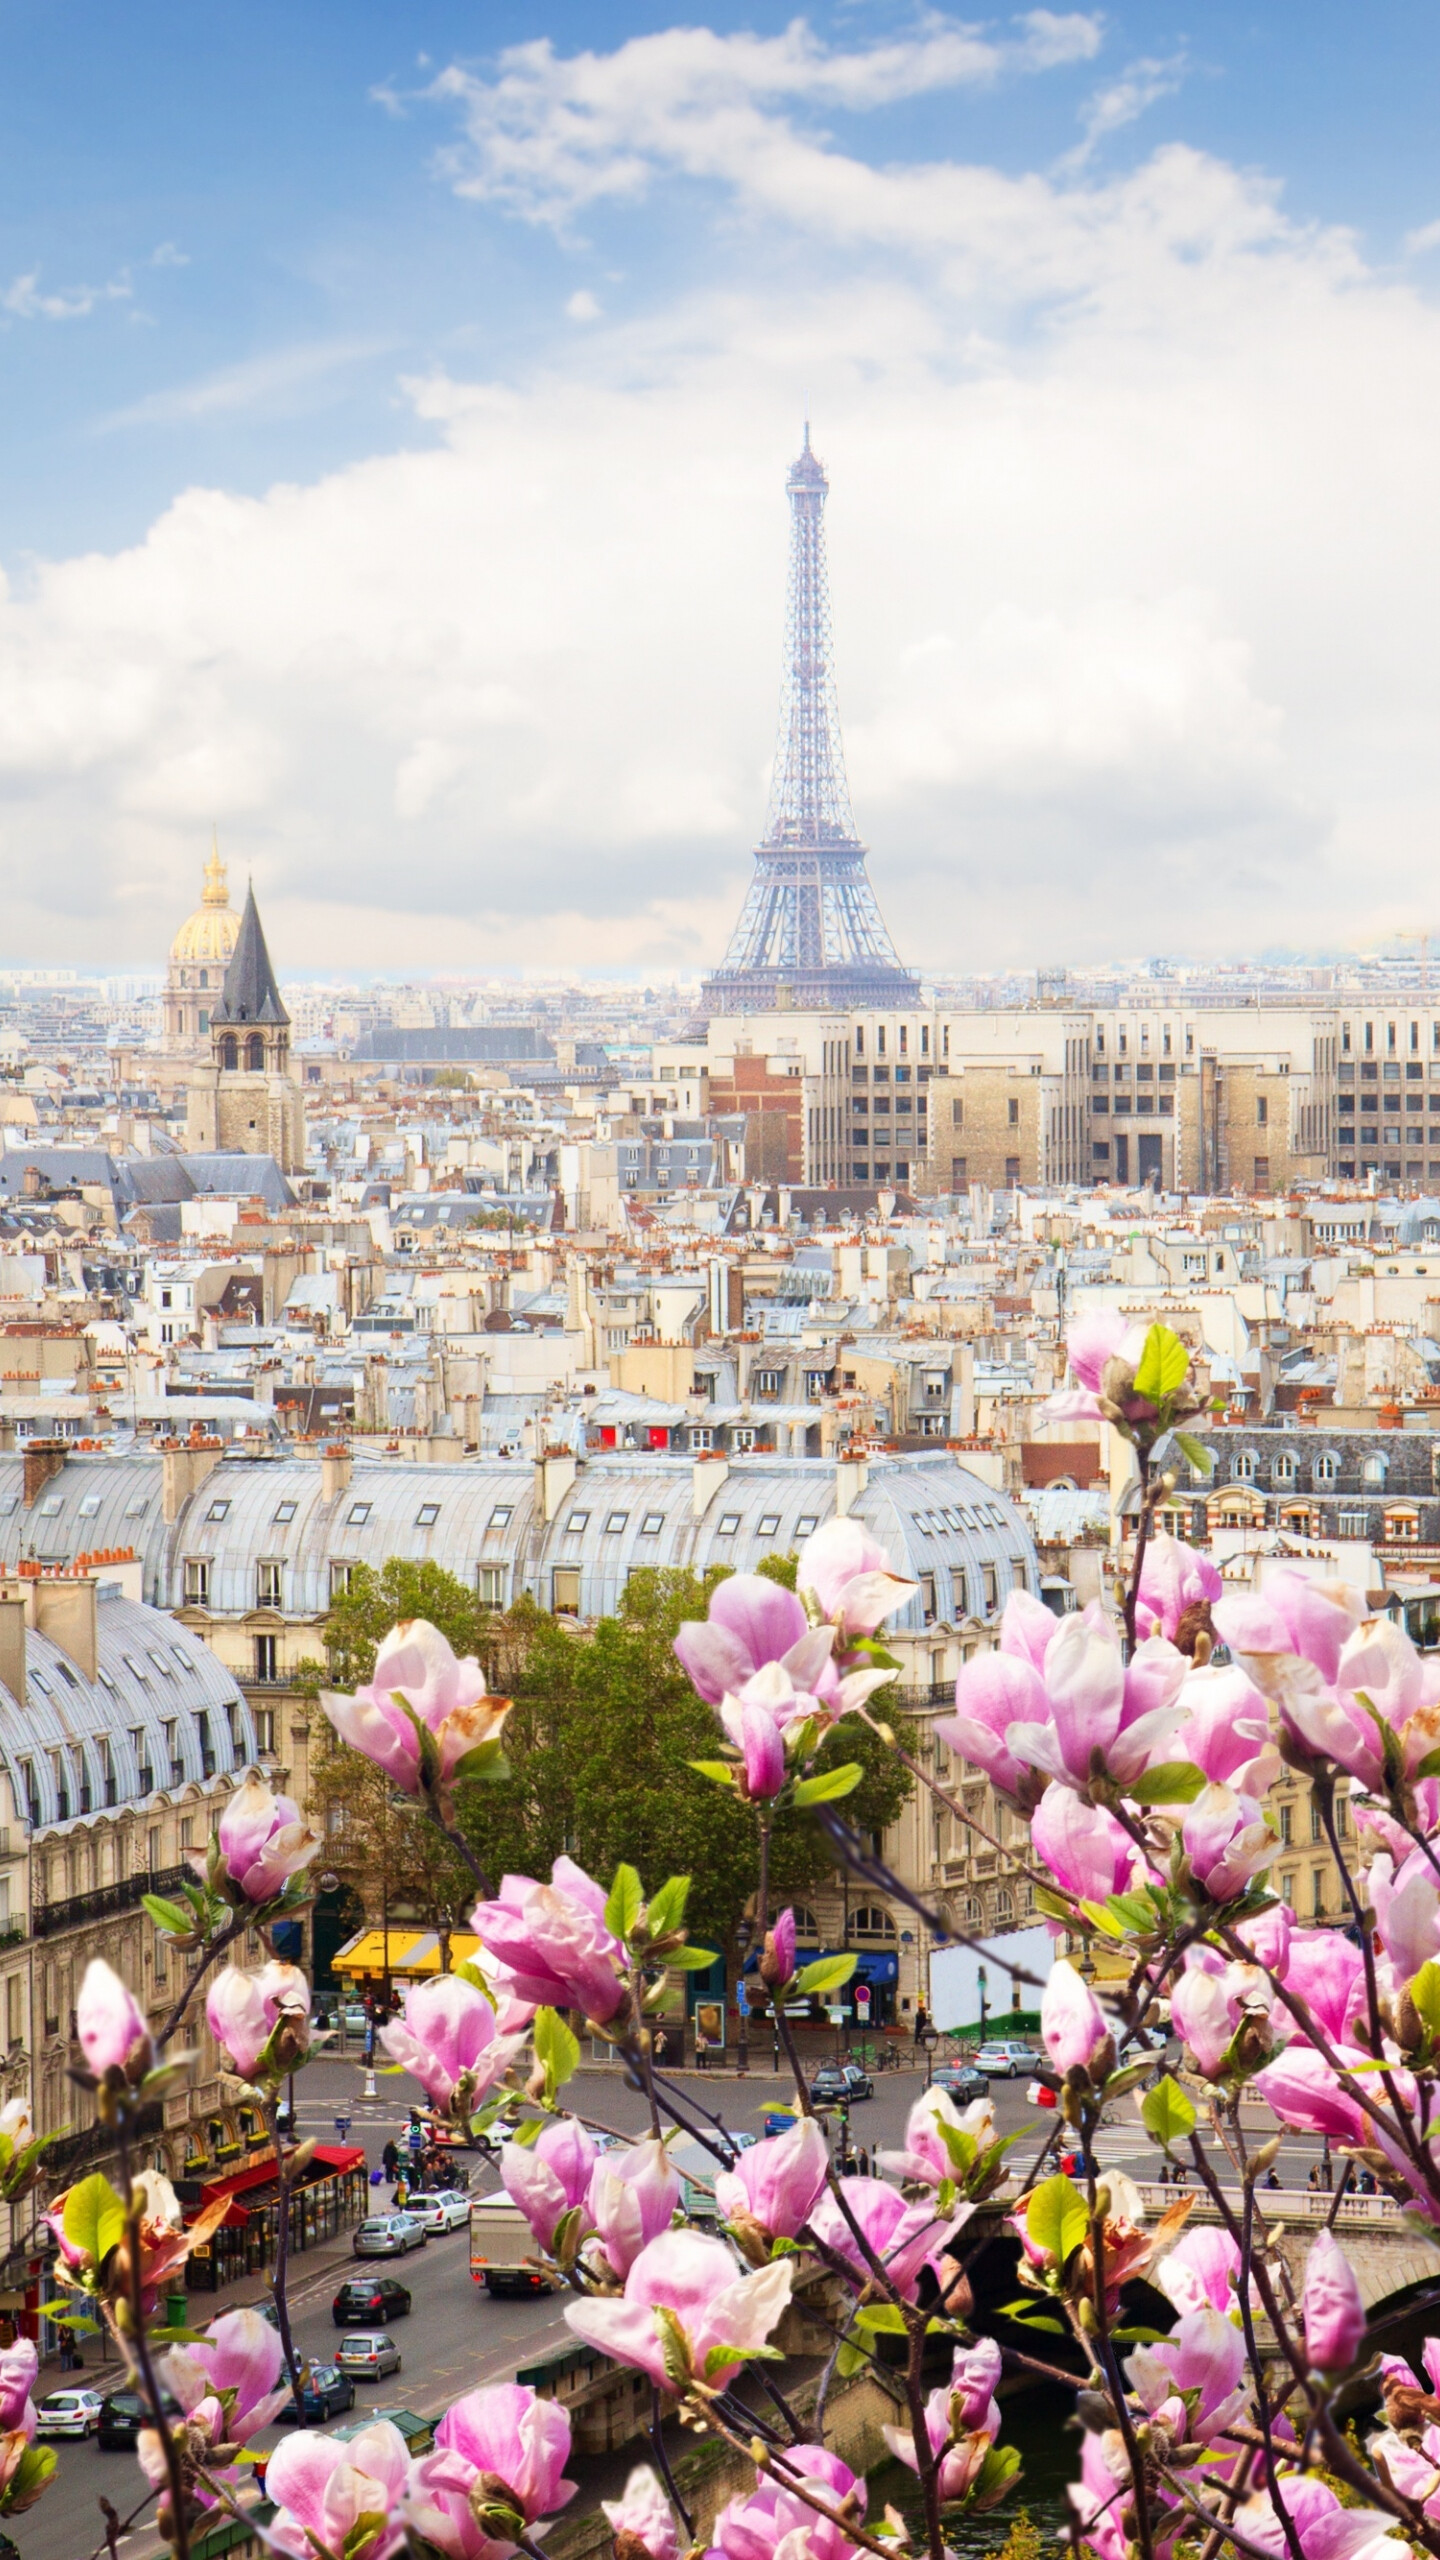 France: Eiffel Tower, Paris, A developed country ranked 28th in the Human Development Index. 1440x2560 HD Wallpaper.